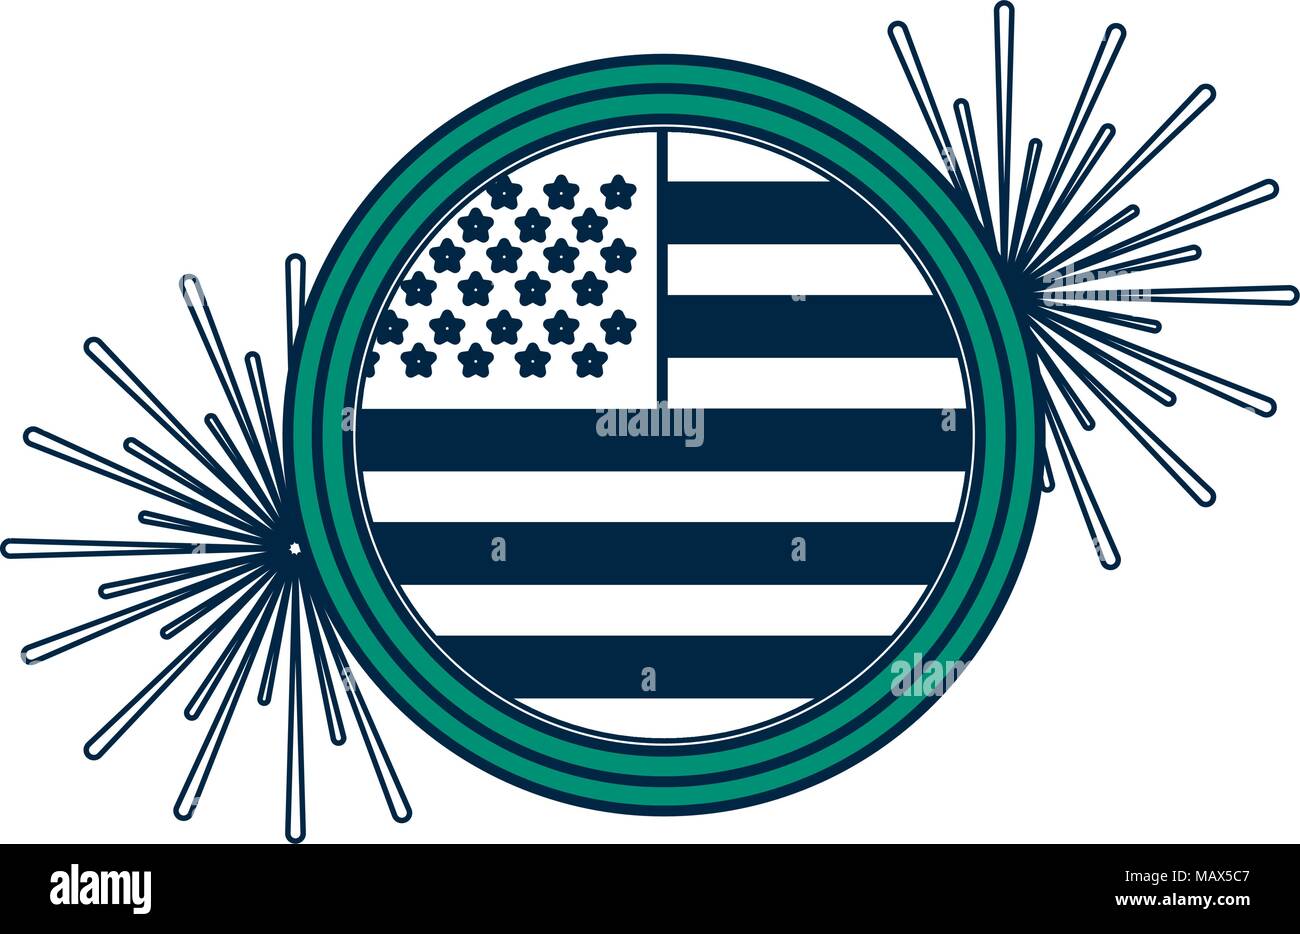 united states of america emblem with fireworks Stock Vector